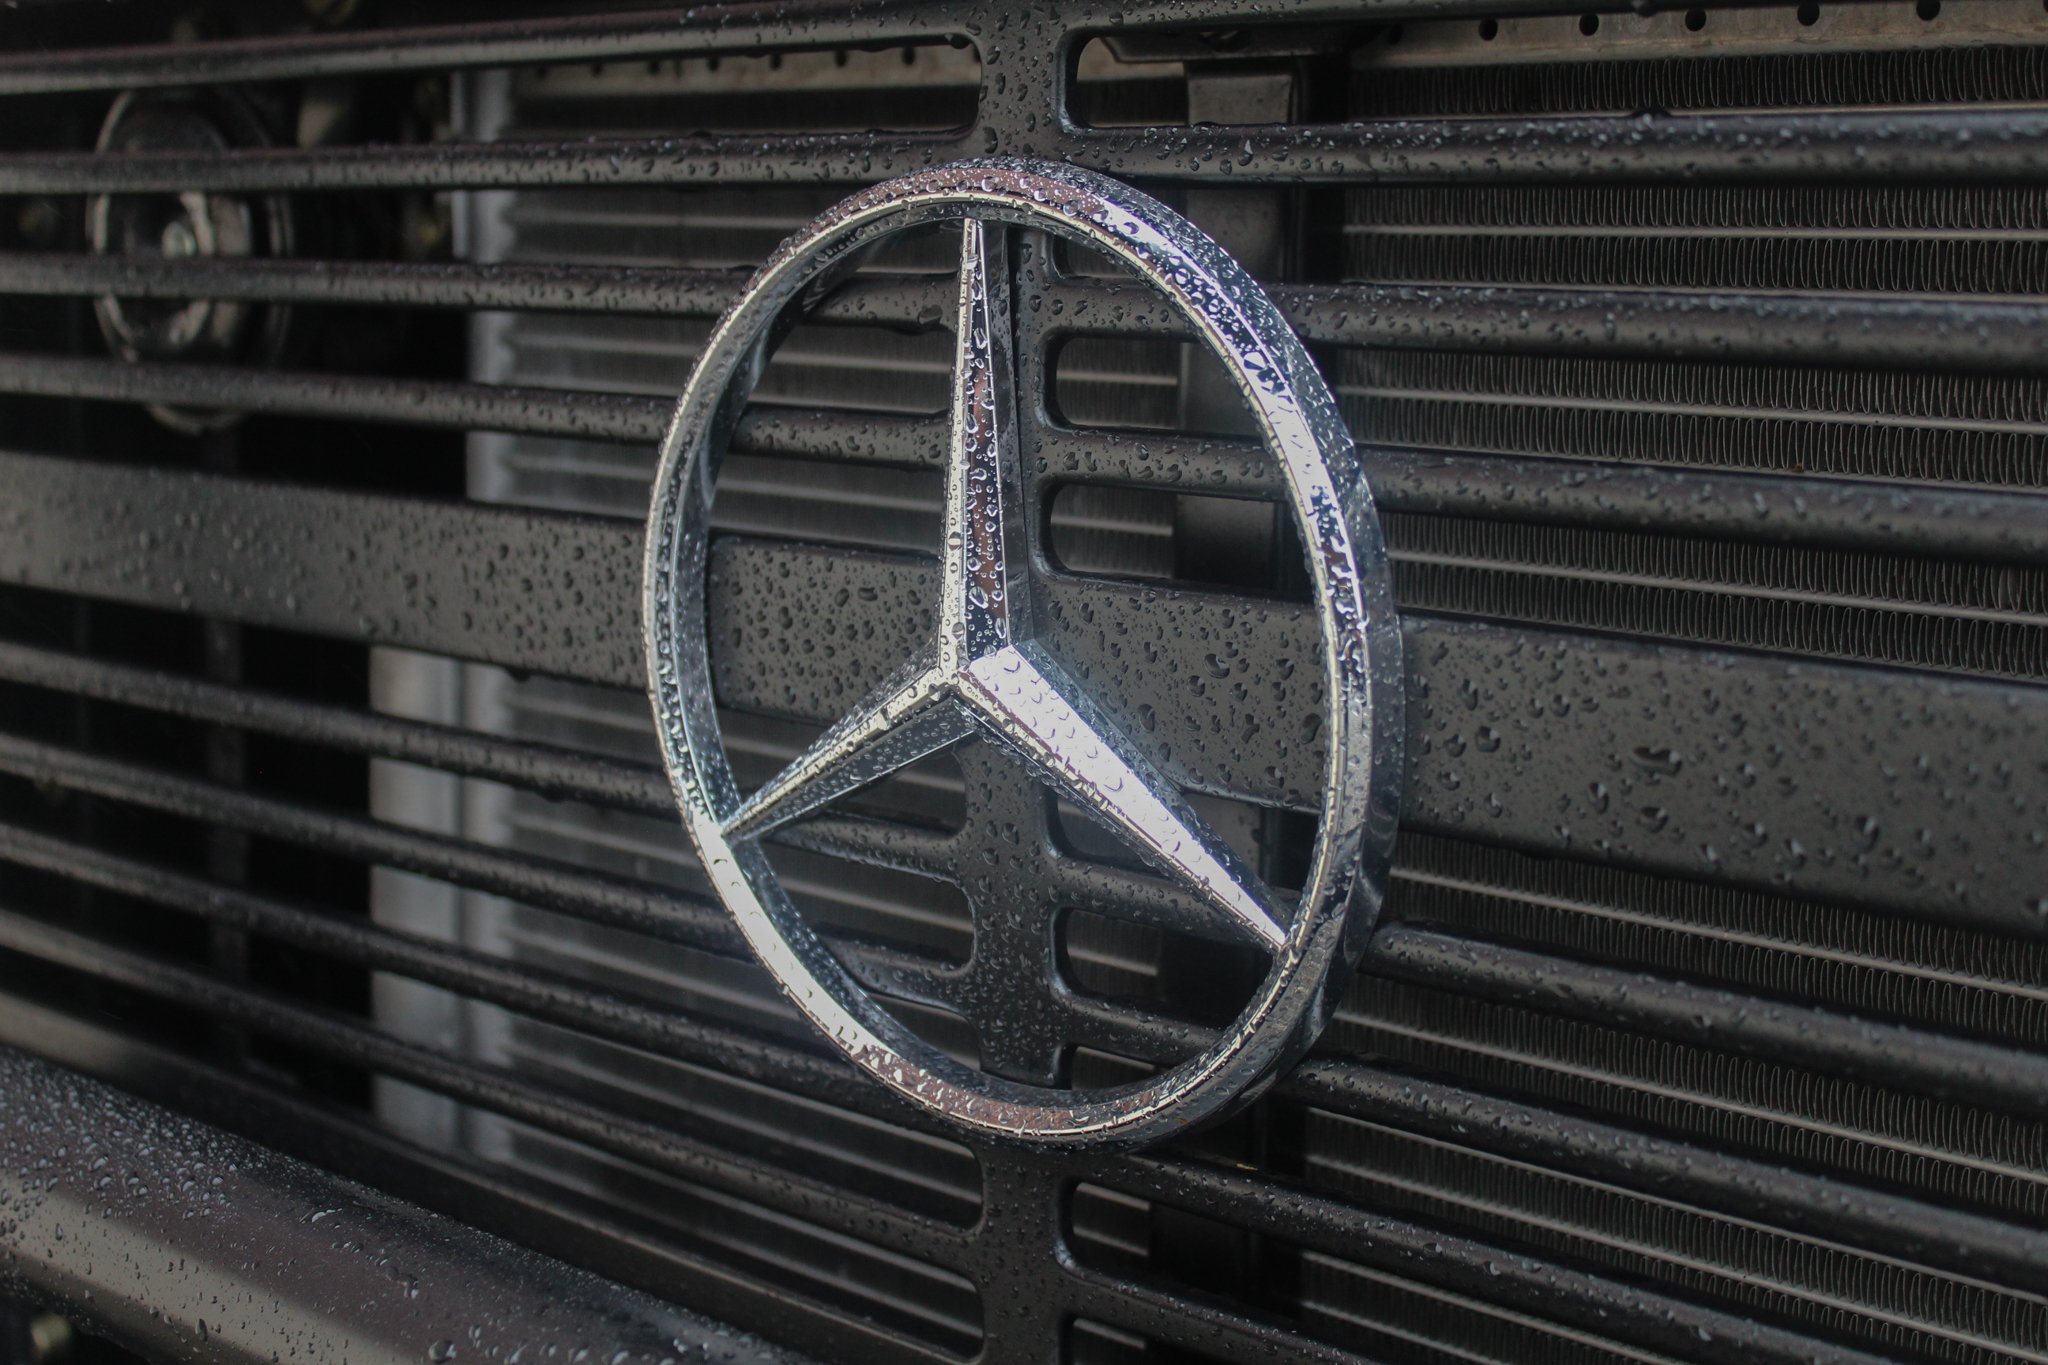 The devil is in the details. 

Our restored 1992 Mercedes-Benz GD250.

#mercedes #mercedesbenz #gd250 #custom #restoration #classiccar #truck #bespoke #luxurylifestyle #urban #classic #vintage #adventure